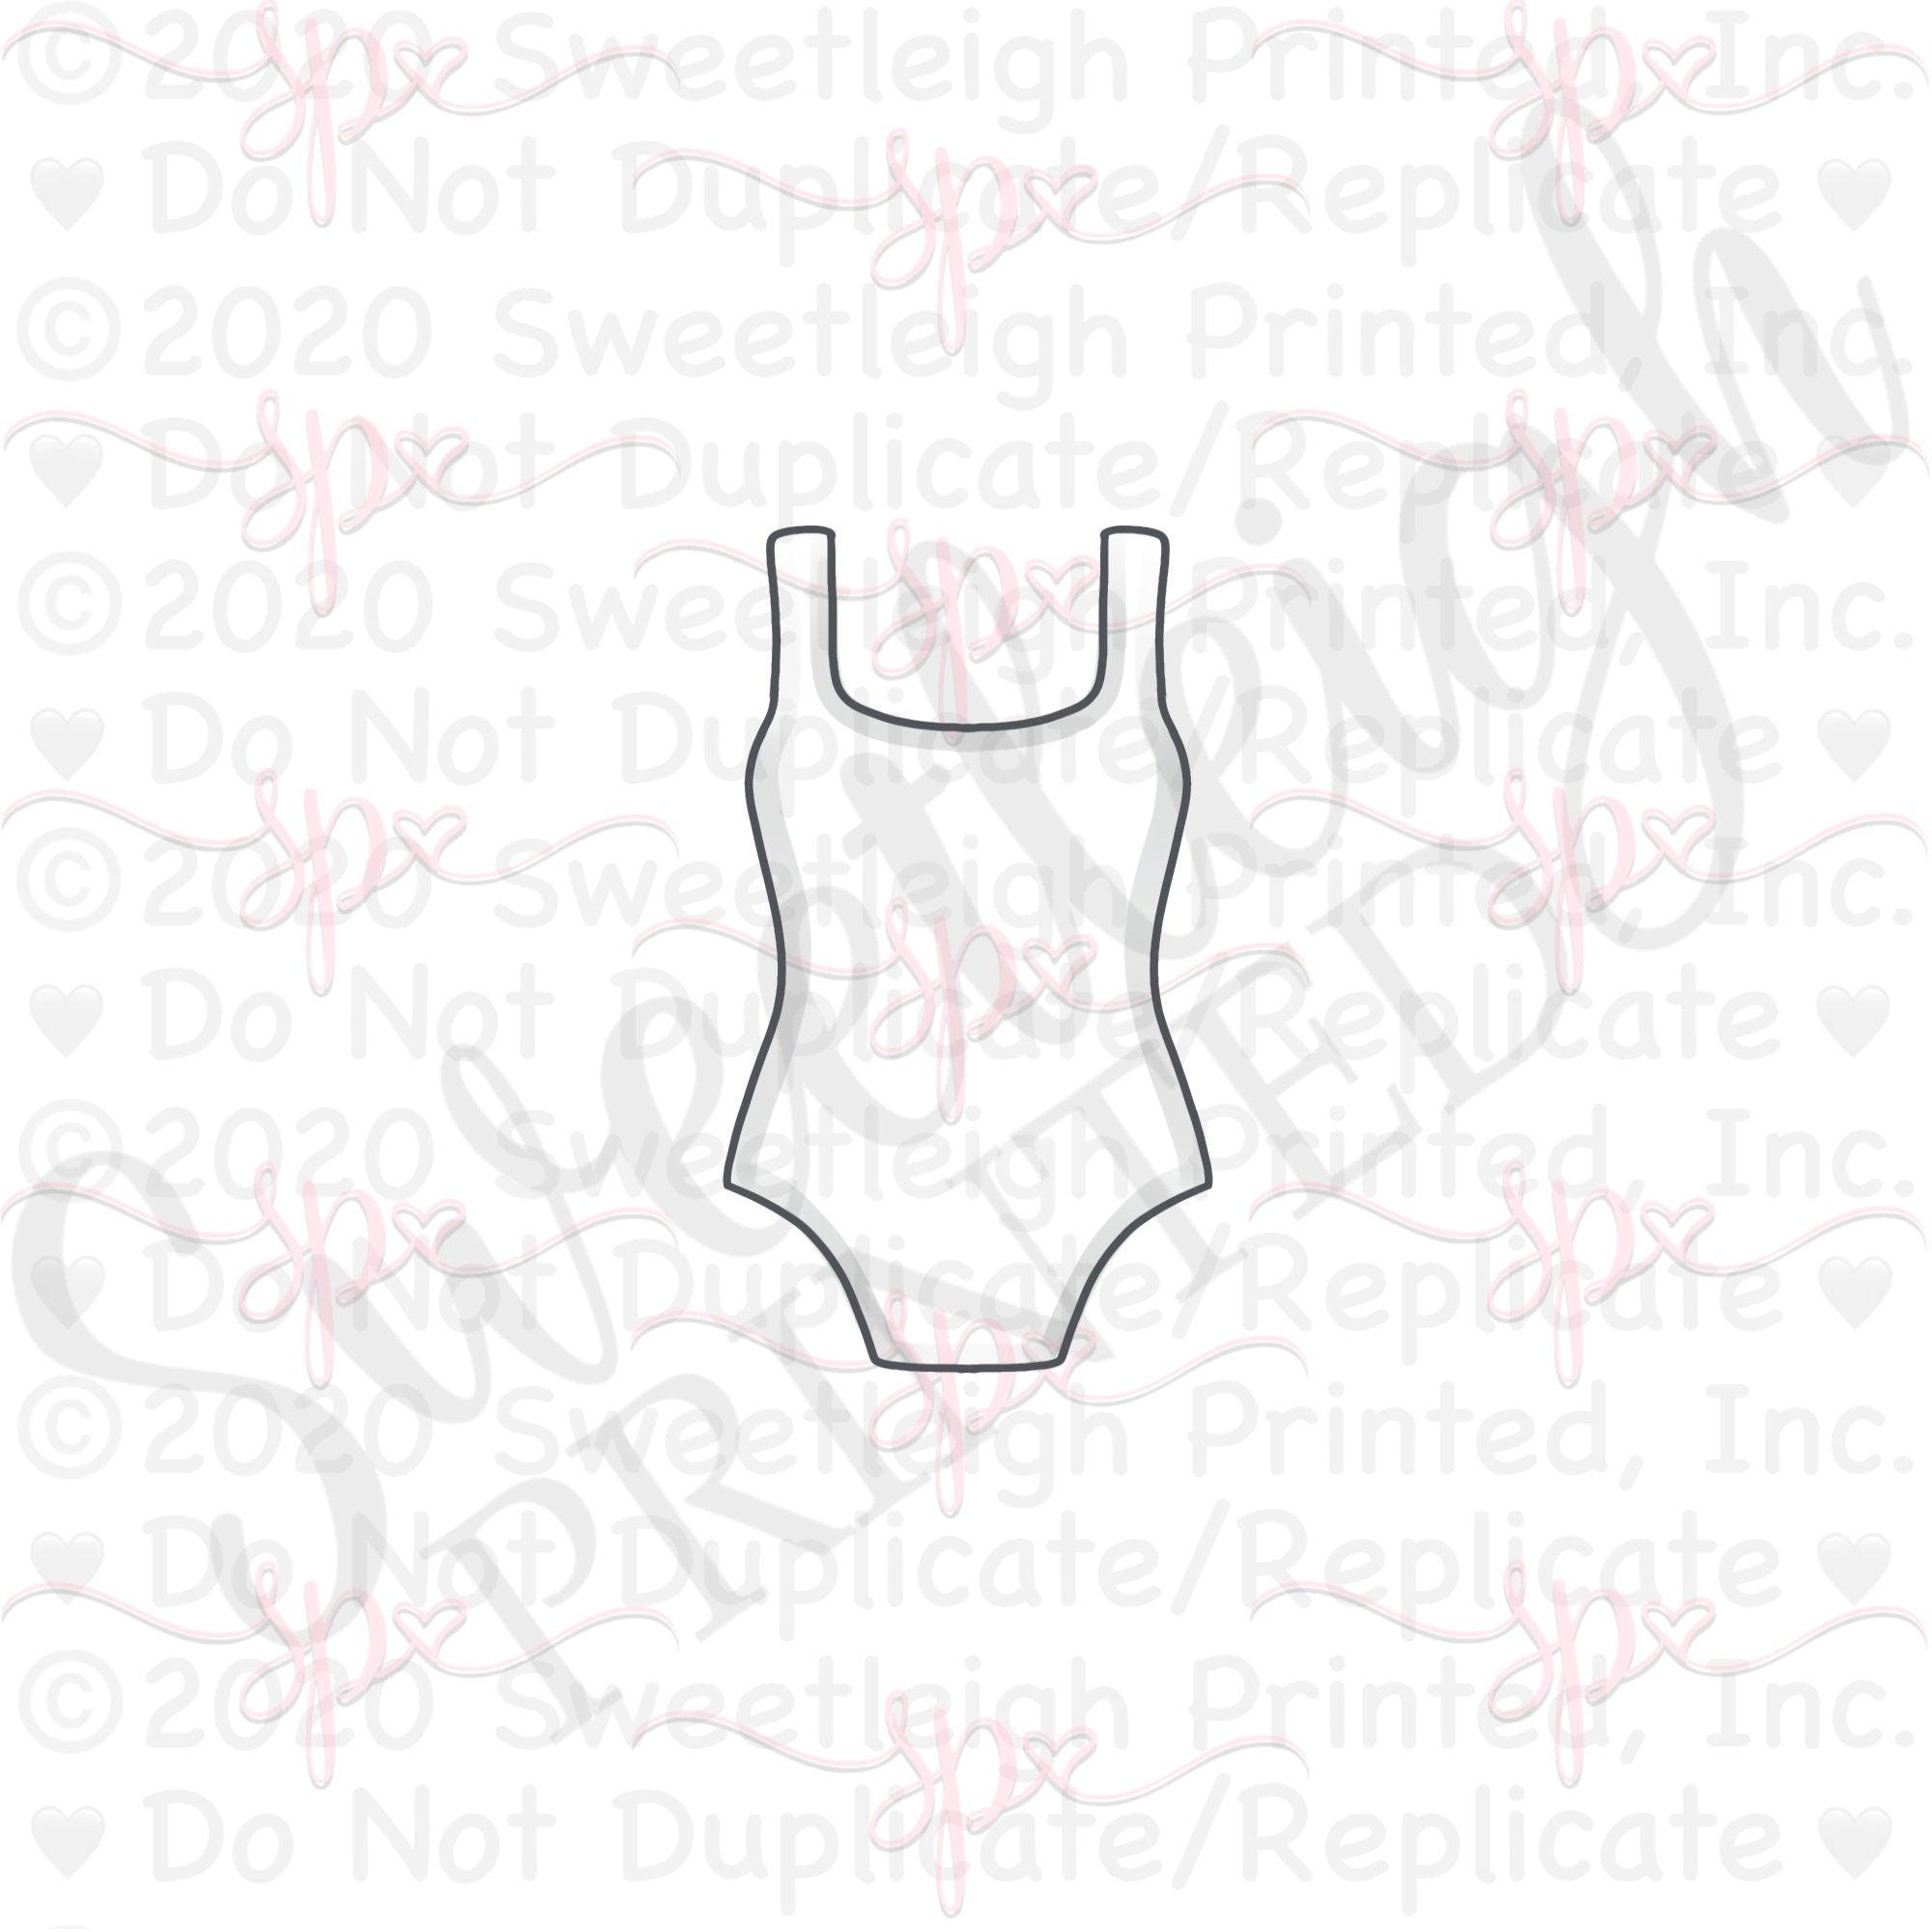 Basic Bathing Suit 2 Cookie Cutter - Sweetleigh 